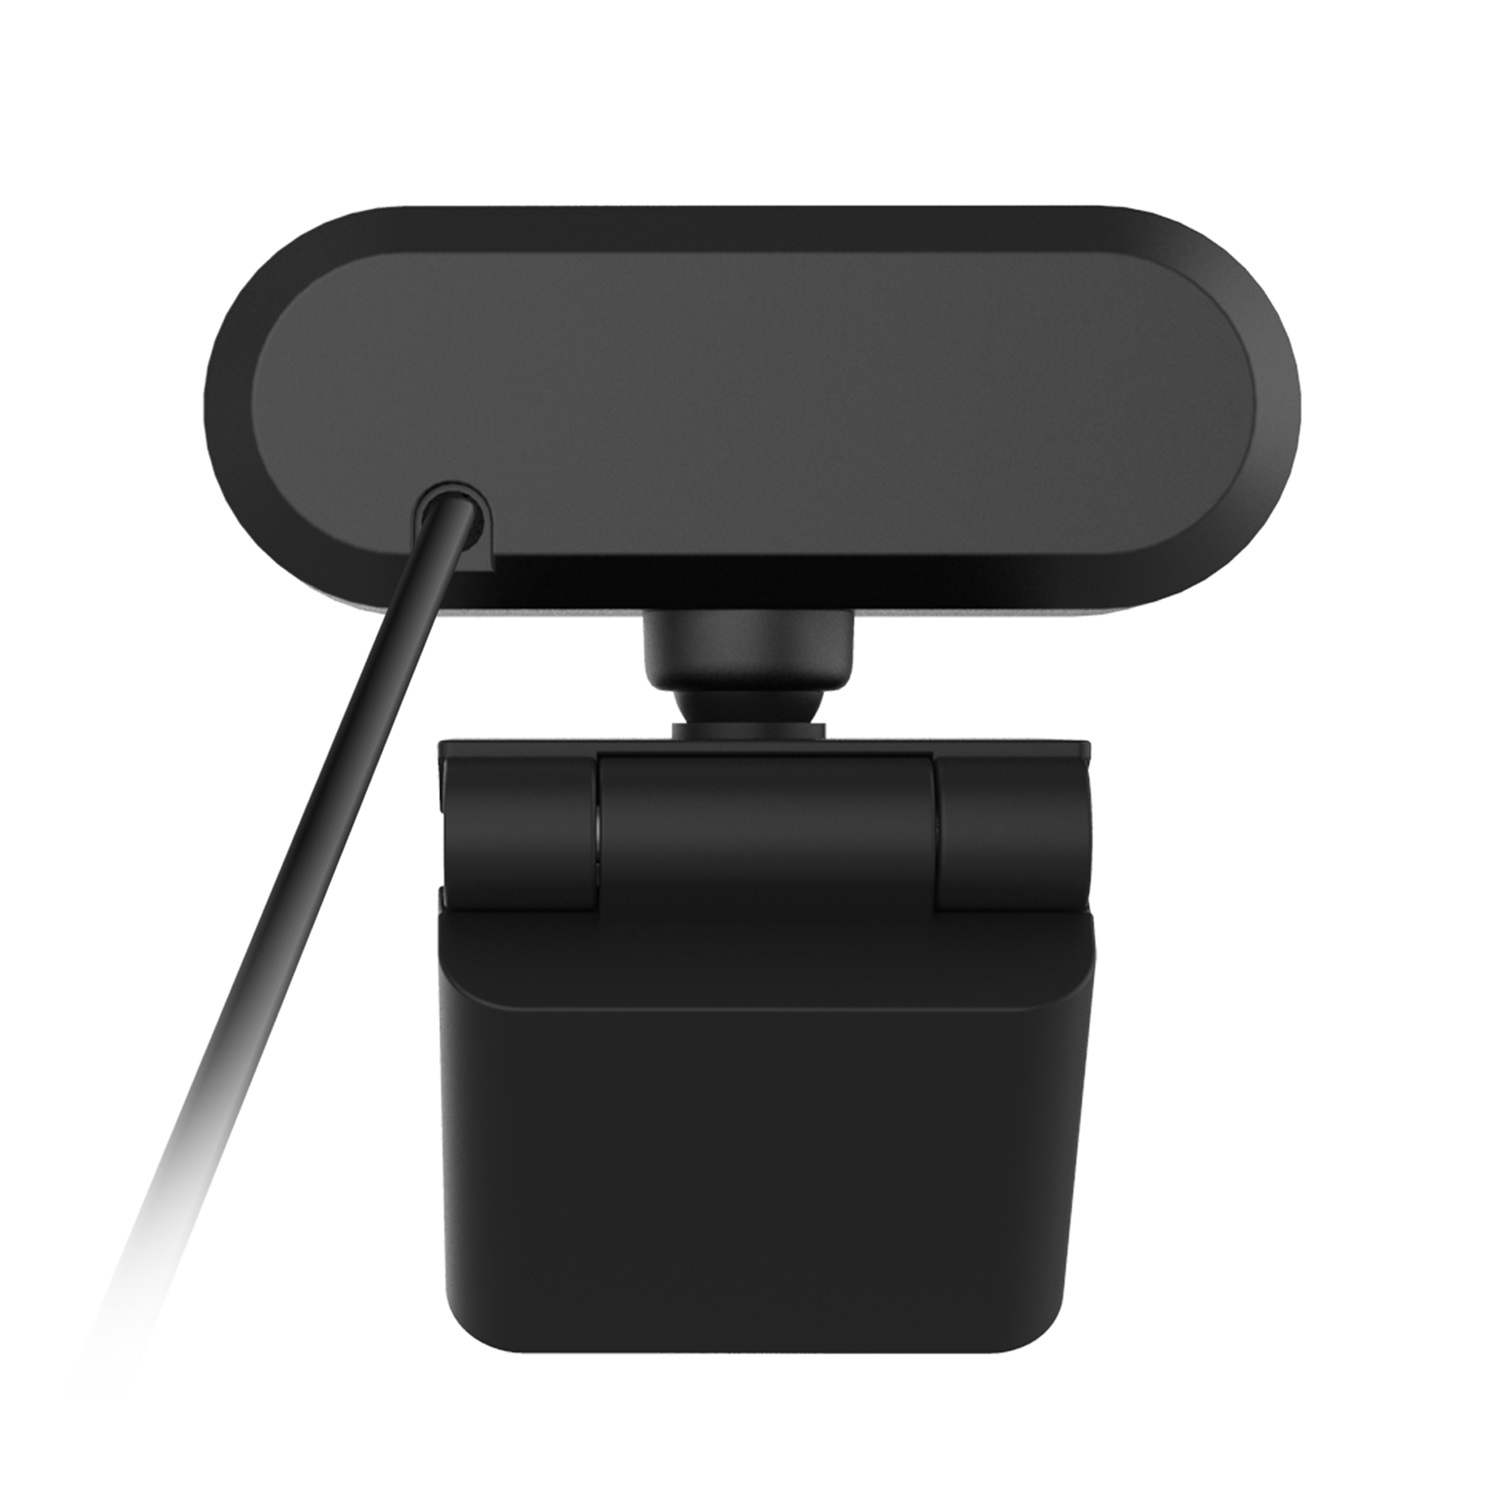 HD 1080P Webcam Mini Computer PC Web Camera with Microphone Rotatable Cameras for Live Broadcast Video Calling